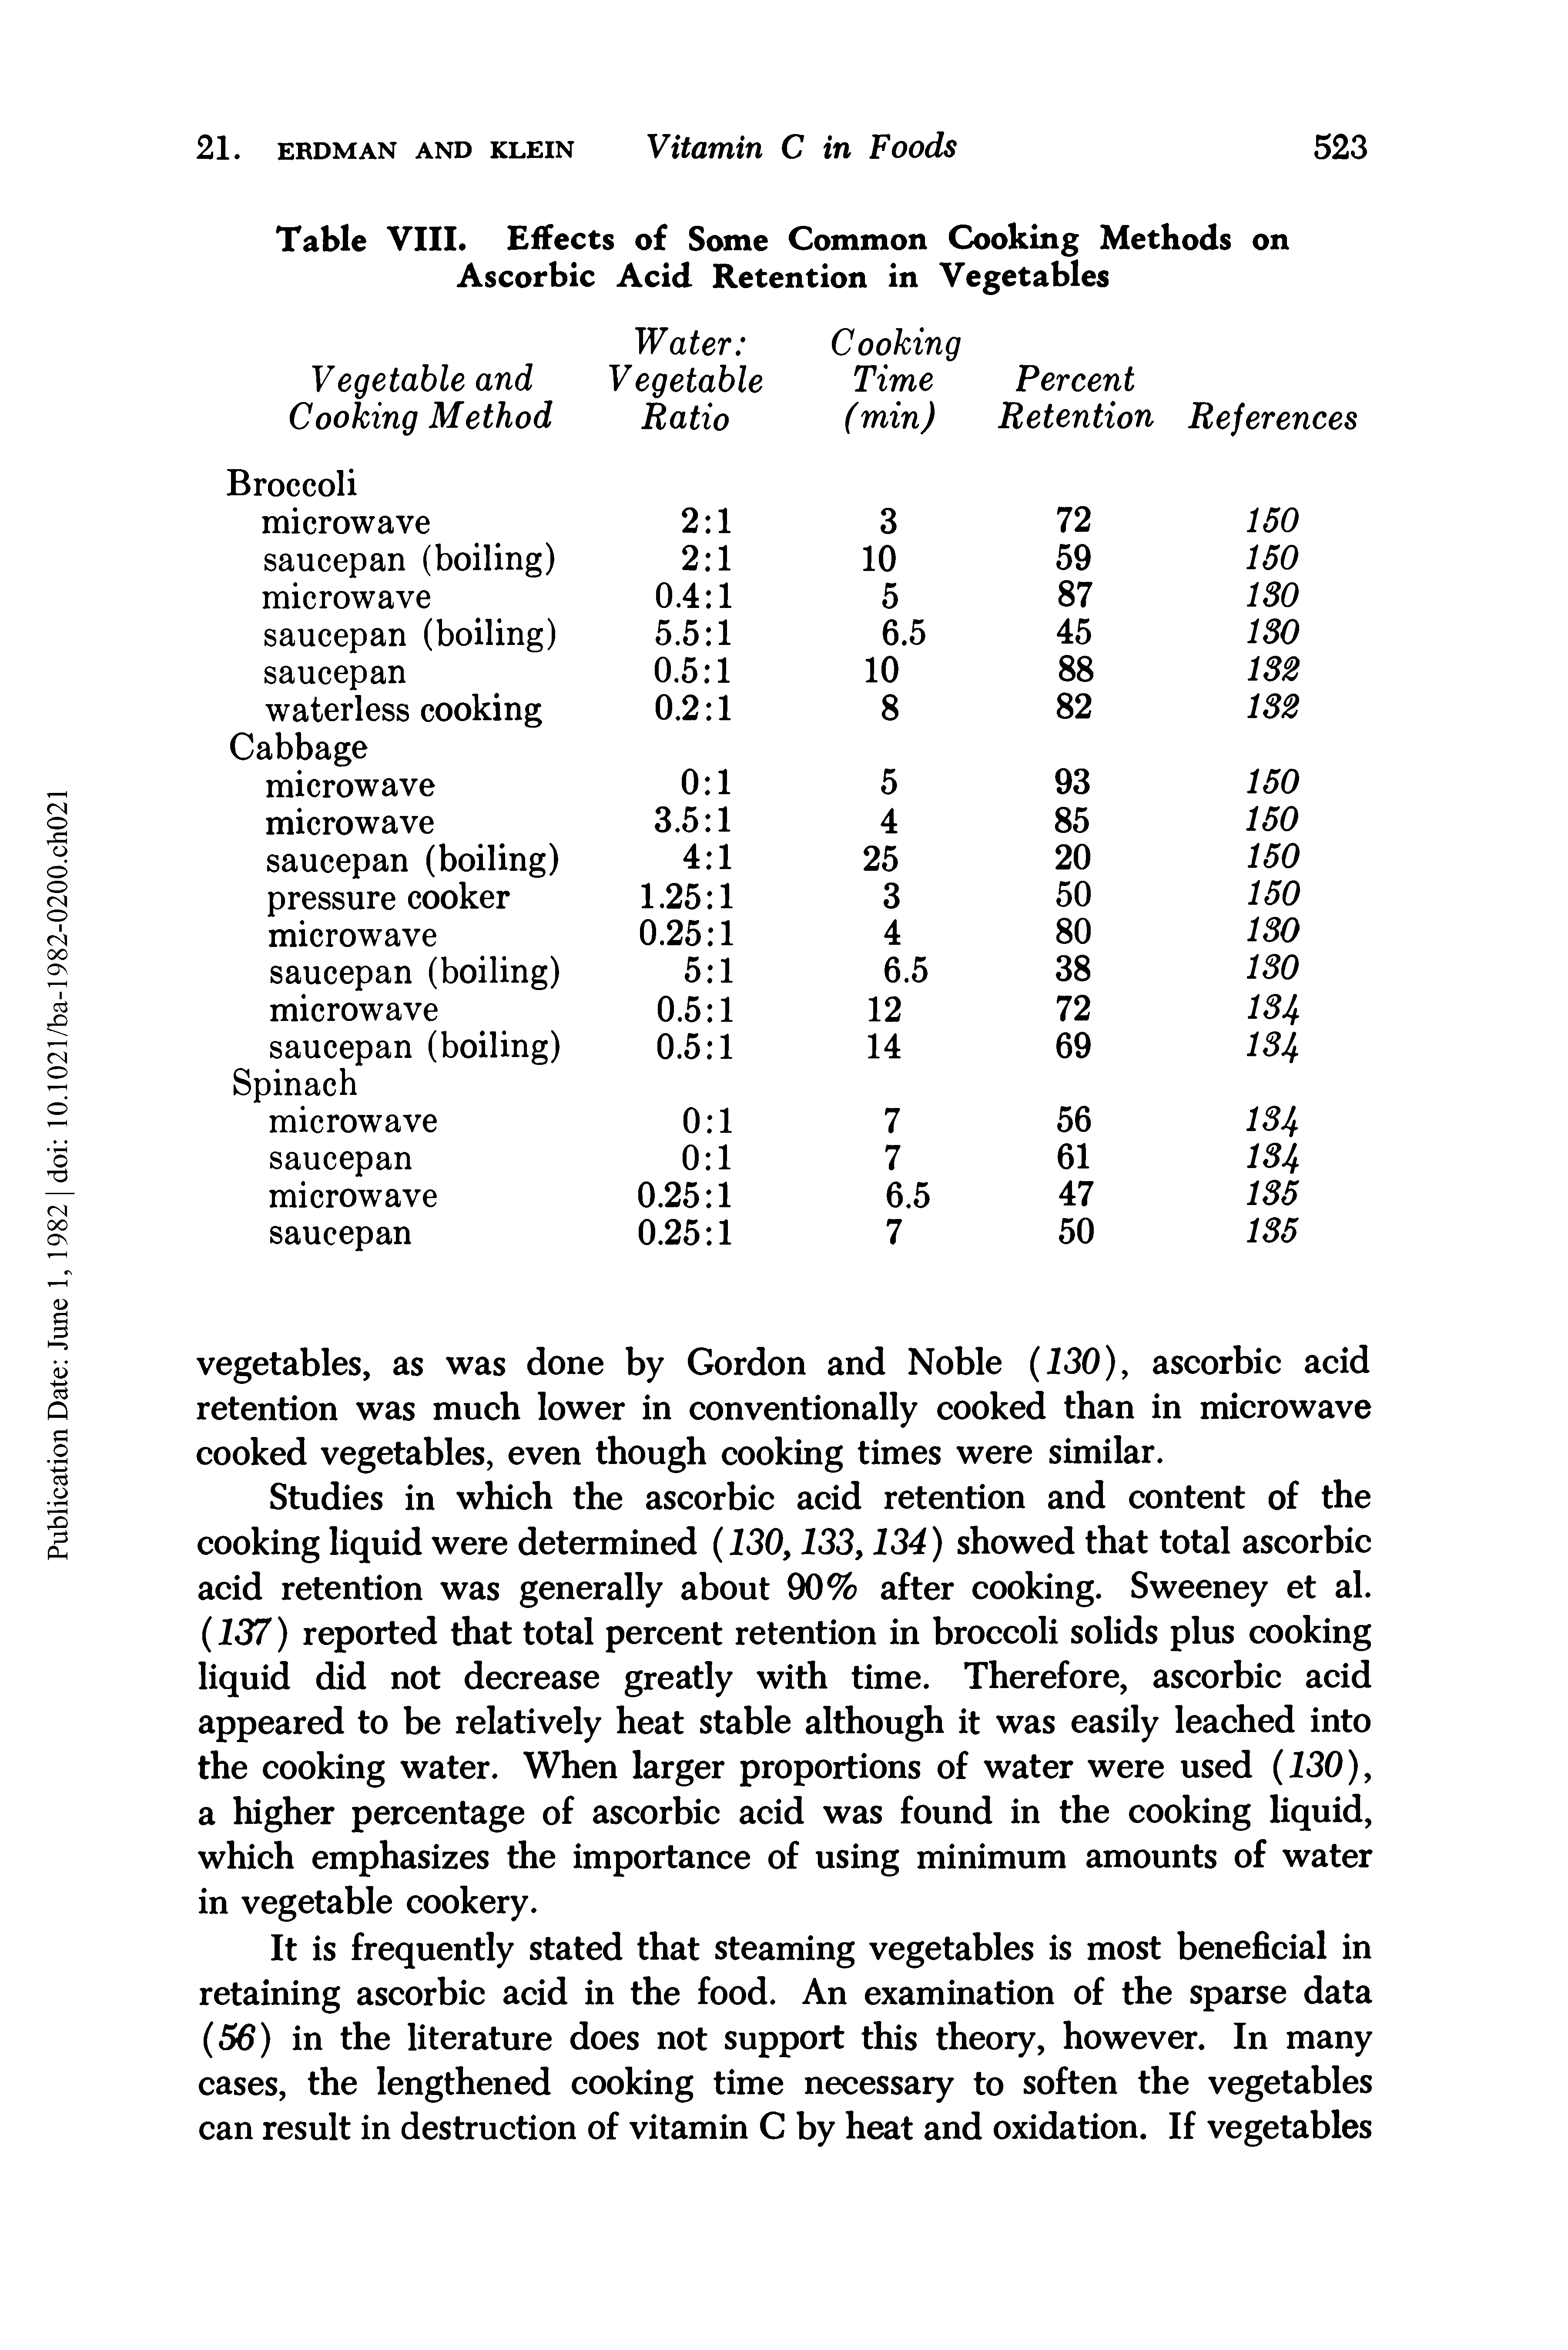 Table VIII. Effects of Some Common Cooking Methods on Ascorbic Acid Retention in Vegetables...